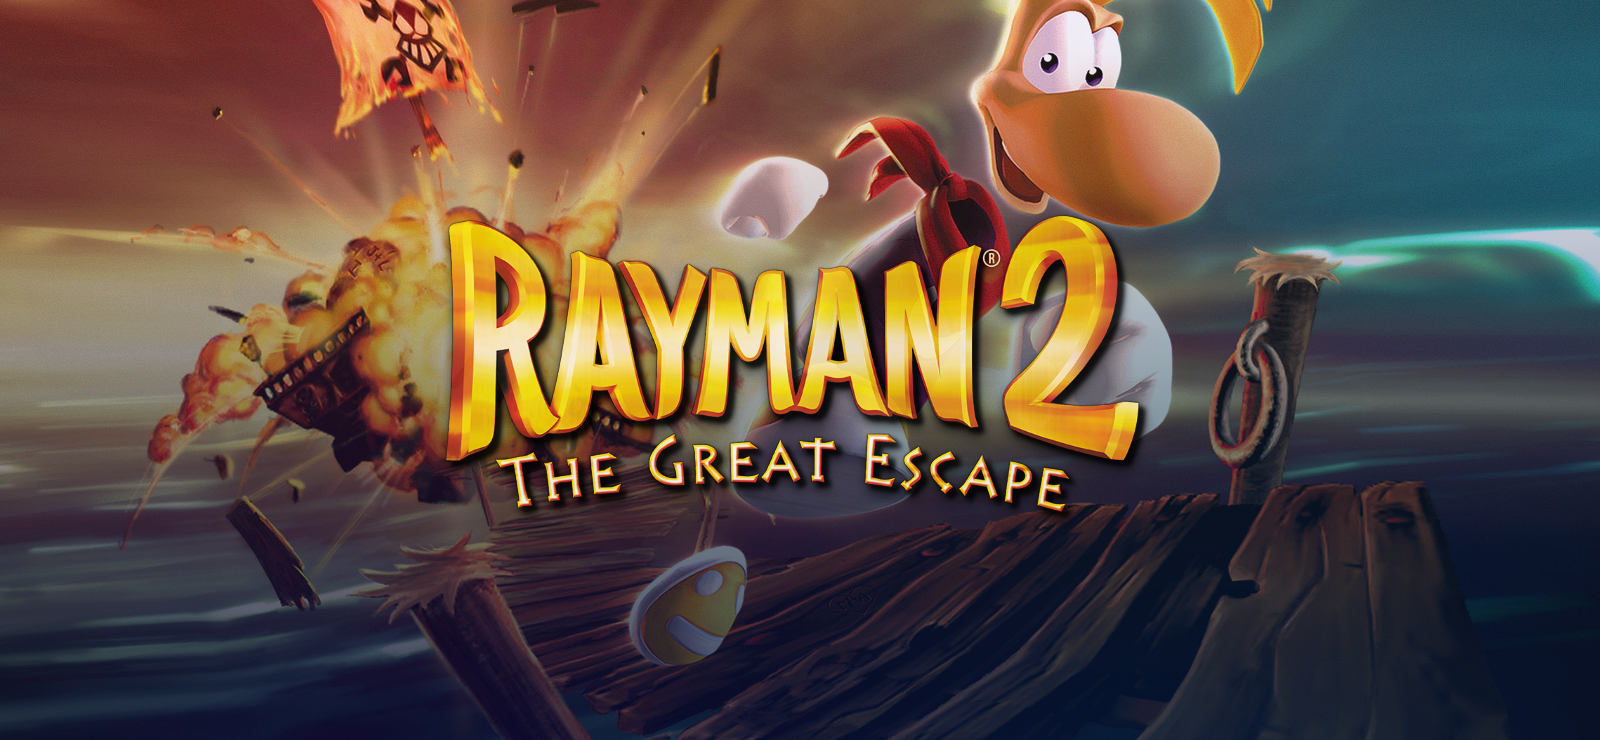 BESTSELLER - Rayman 2: The Great Escape